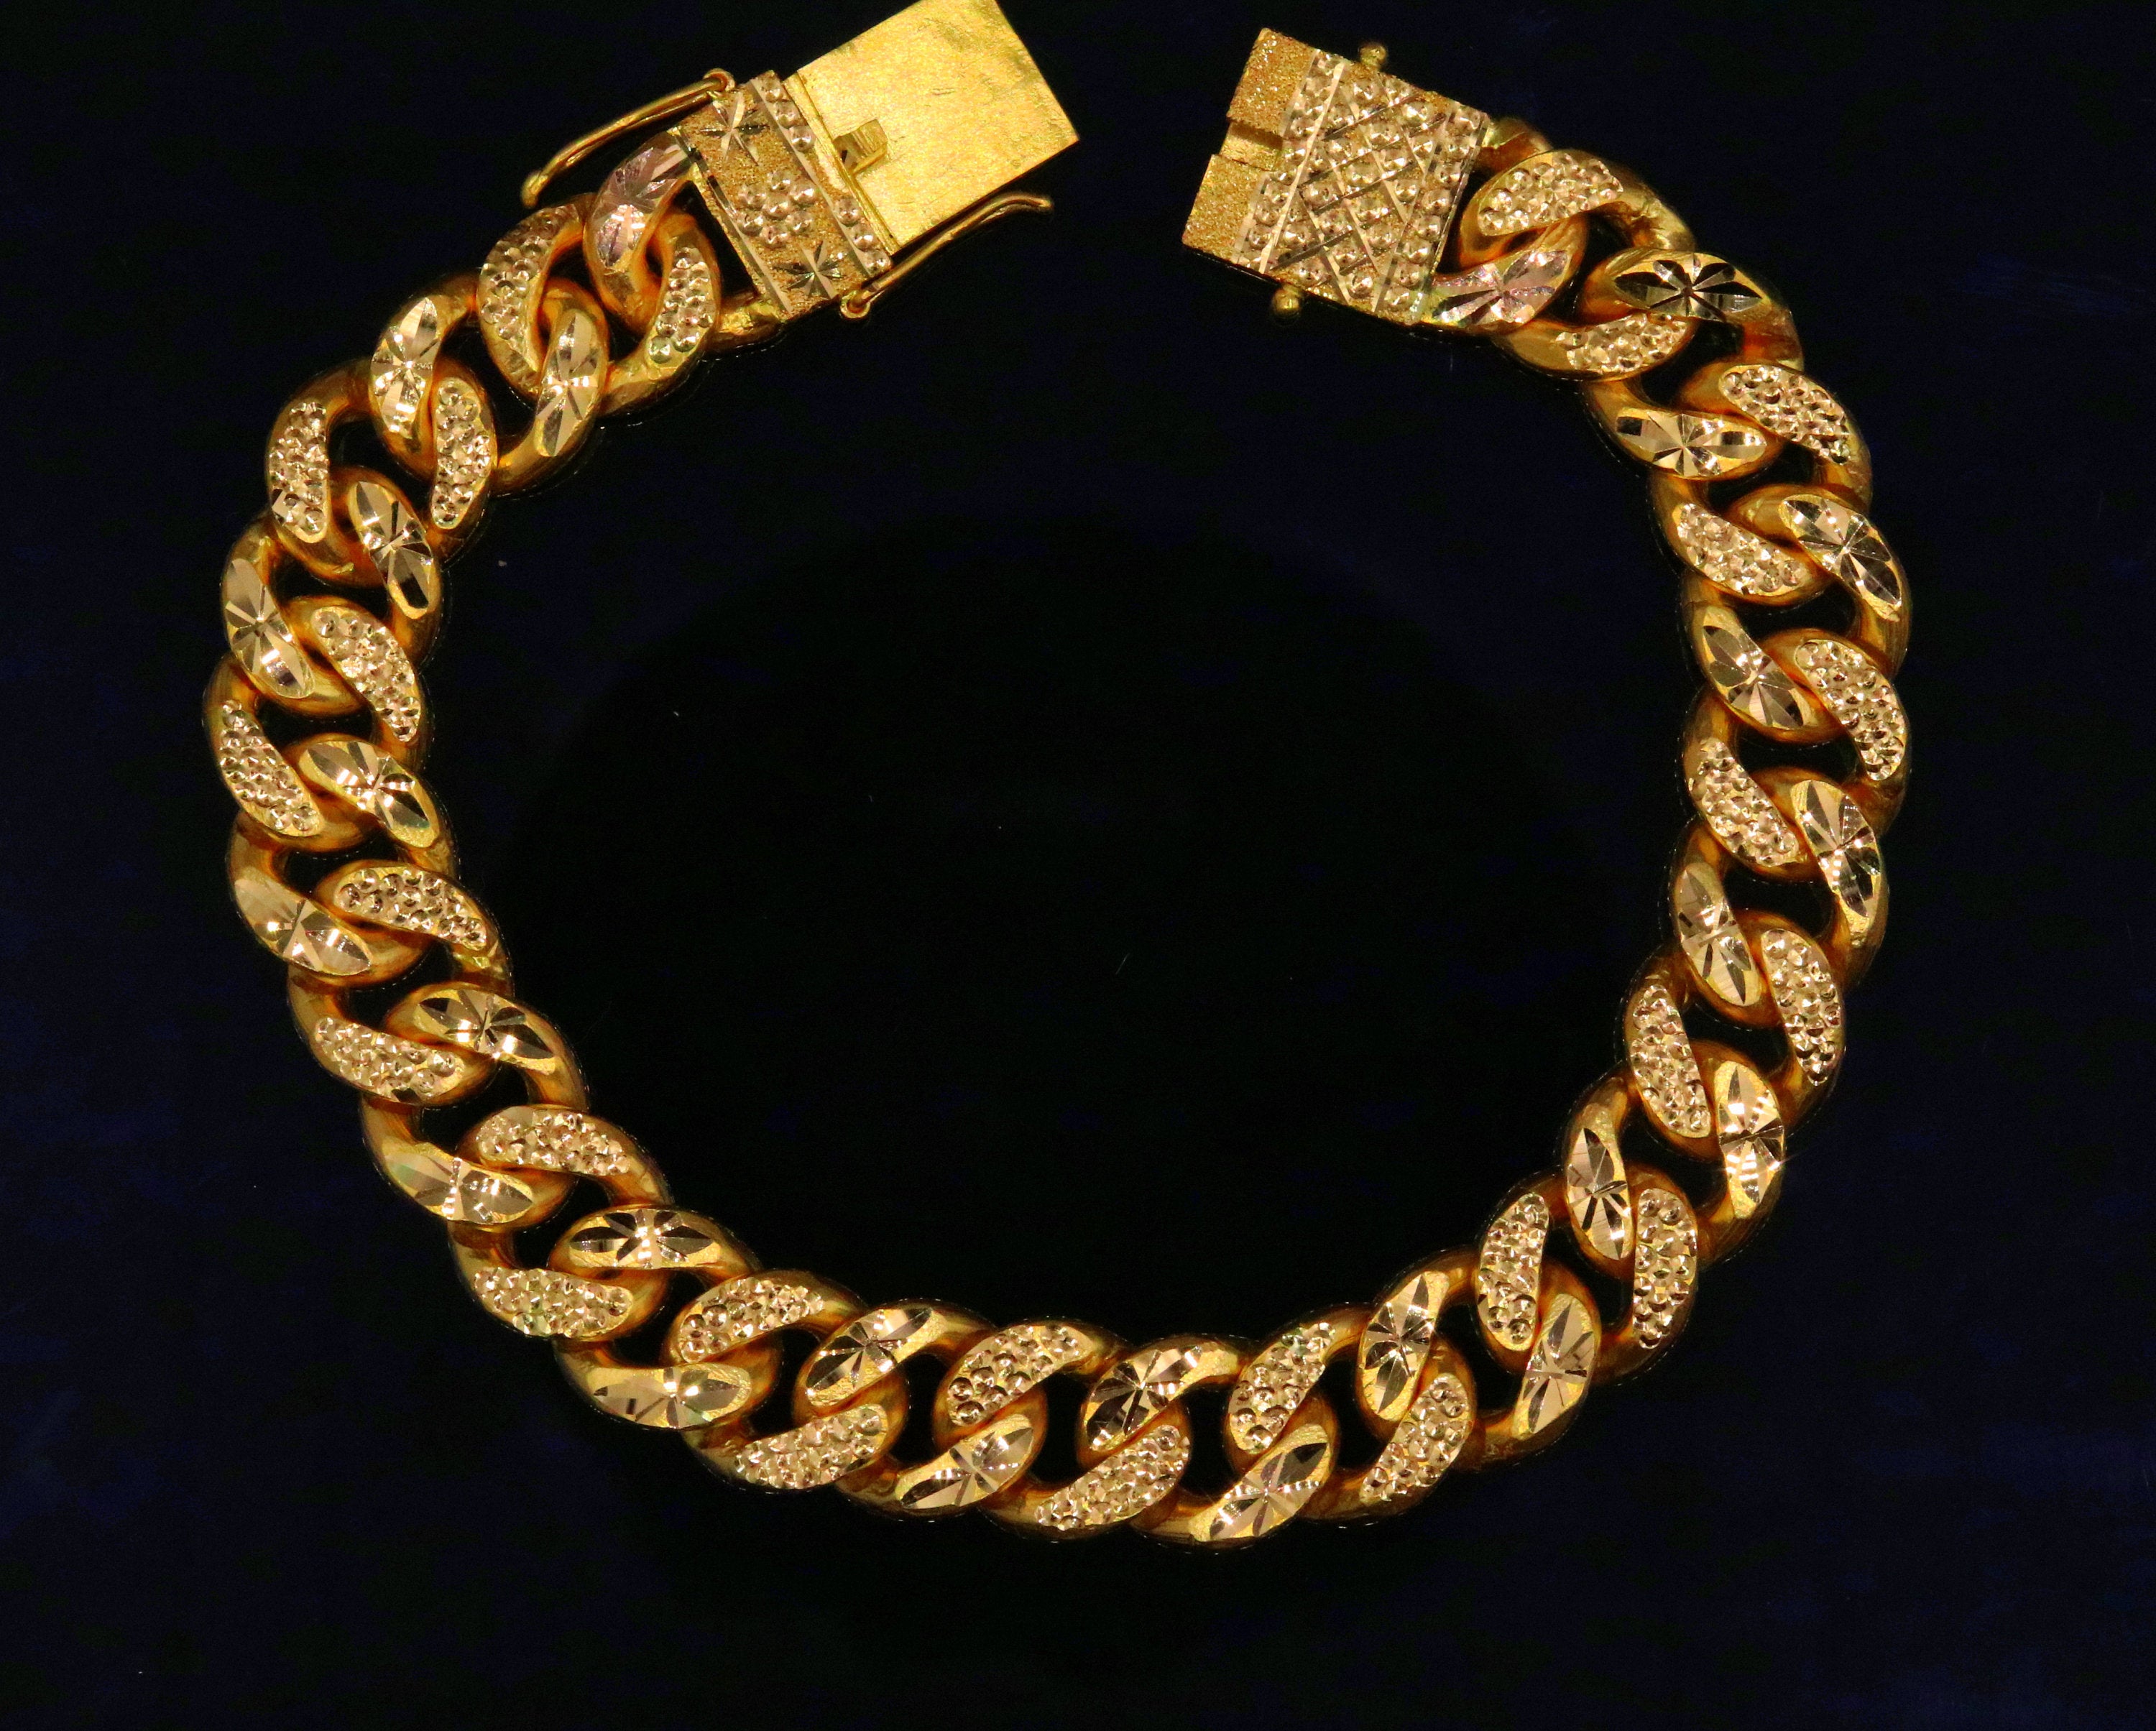 20 Best Gold Bracelets For Men To Spice Up Any Outfit in 2023  FashionBeans